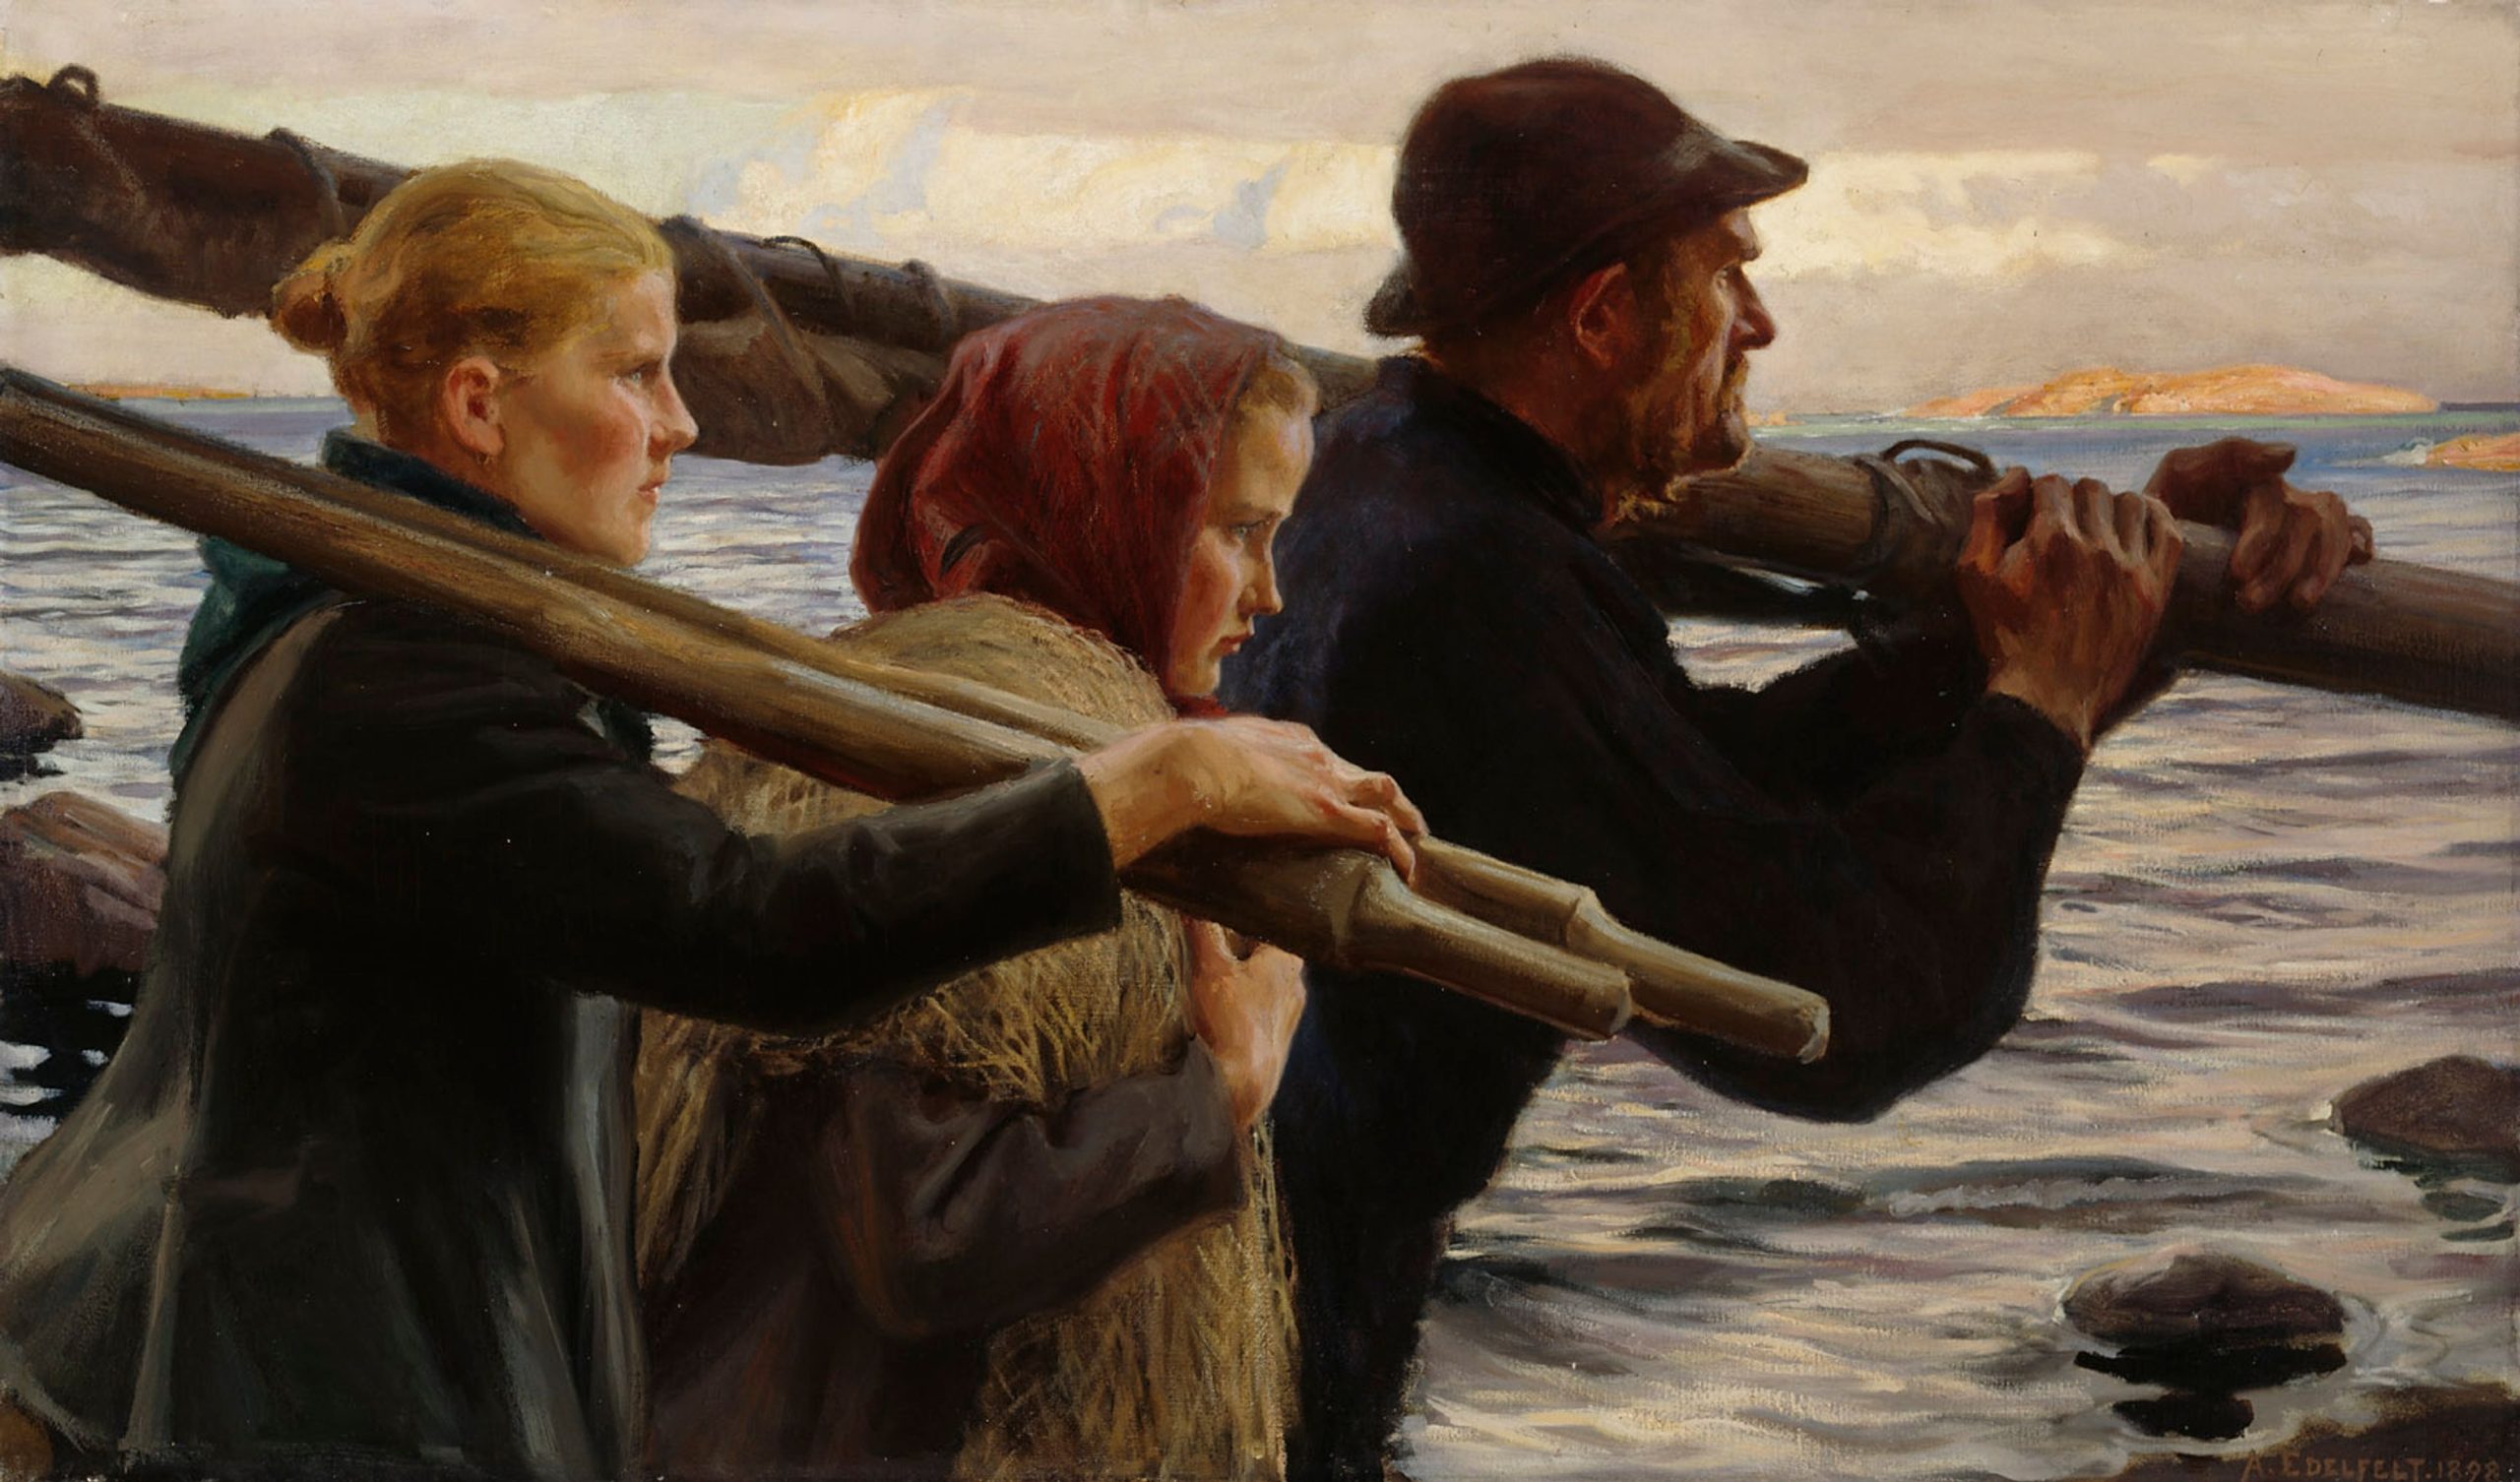 A man and two girls carrying wooden parts of a sailboat looking out at sea